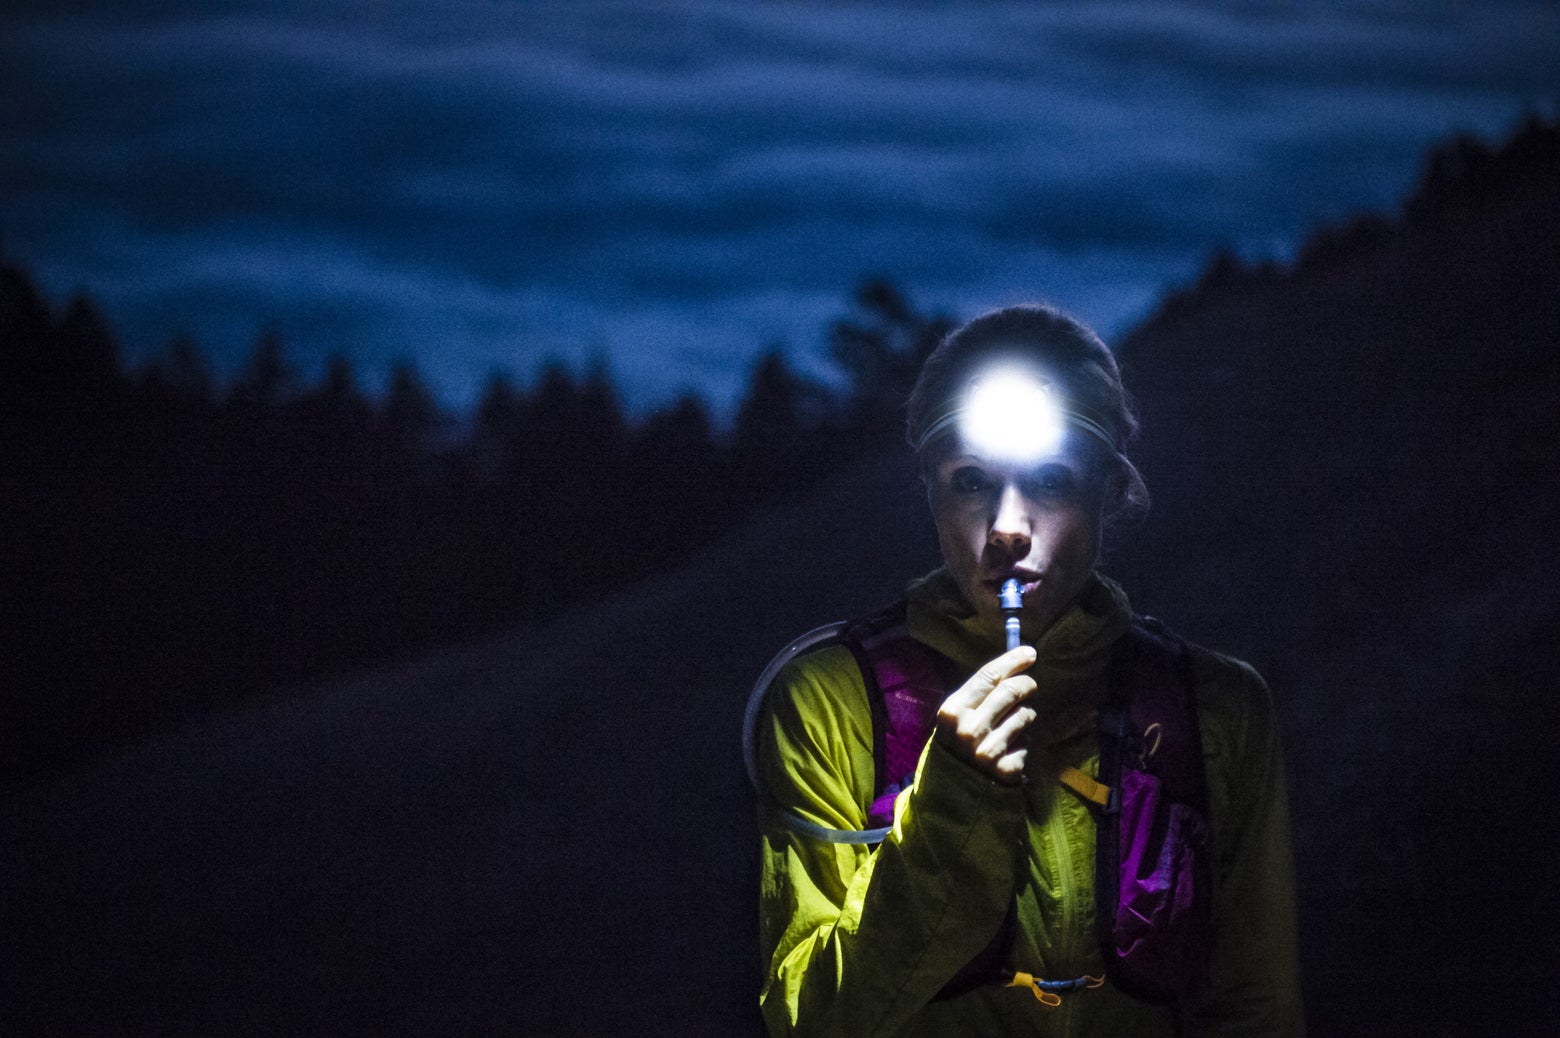 Female trail runner wearing a headlamp and hydration vest 